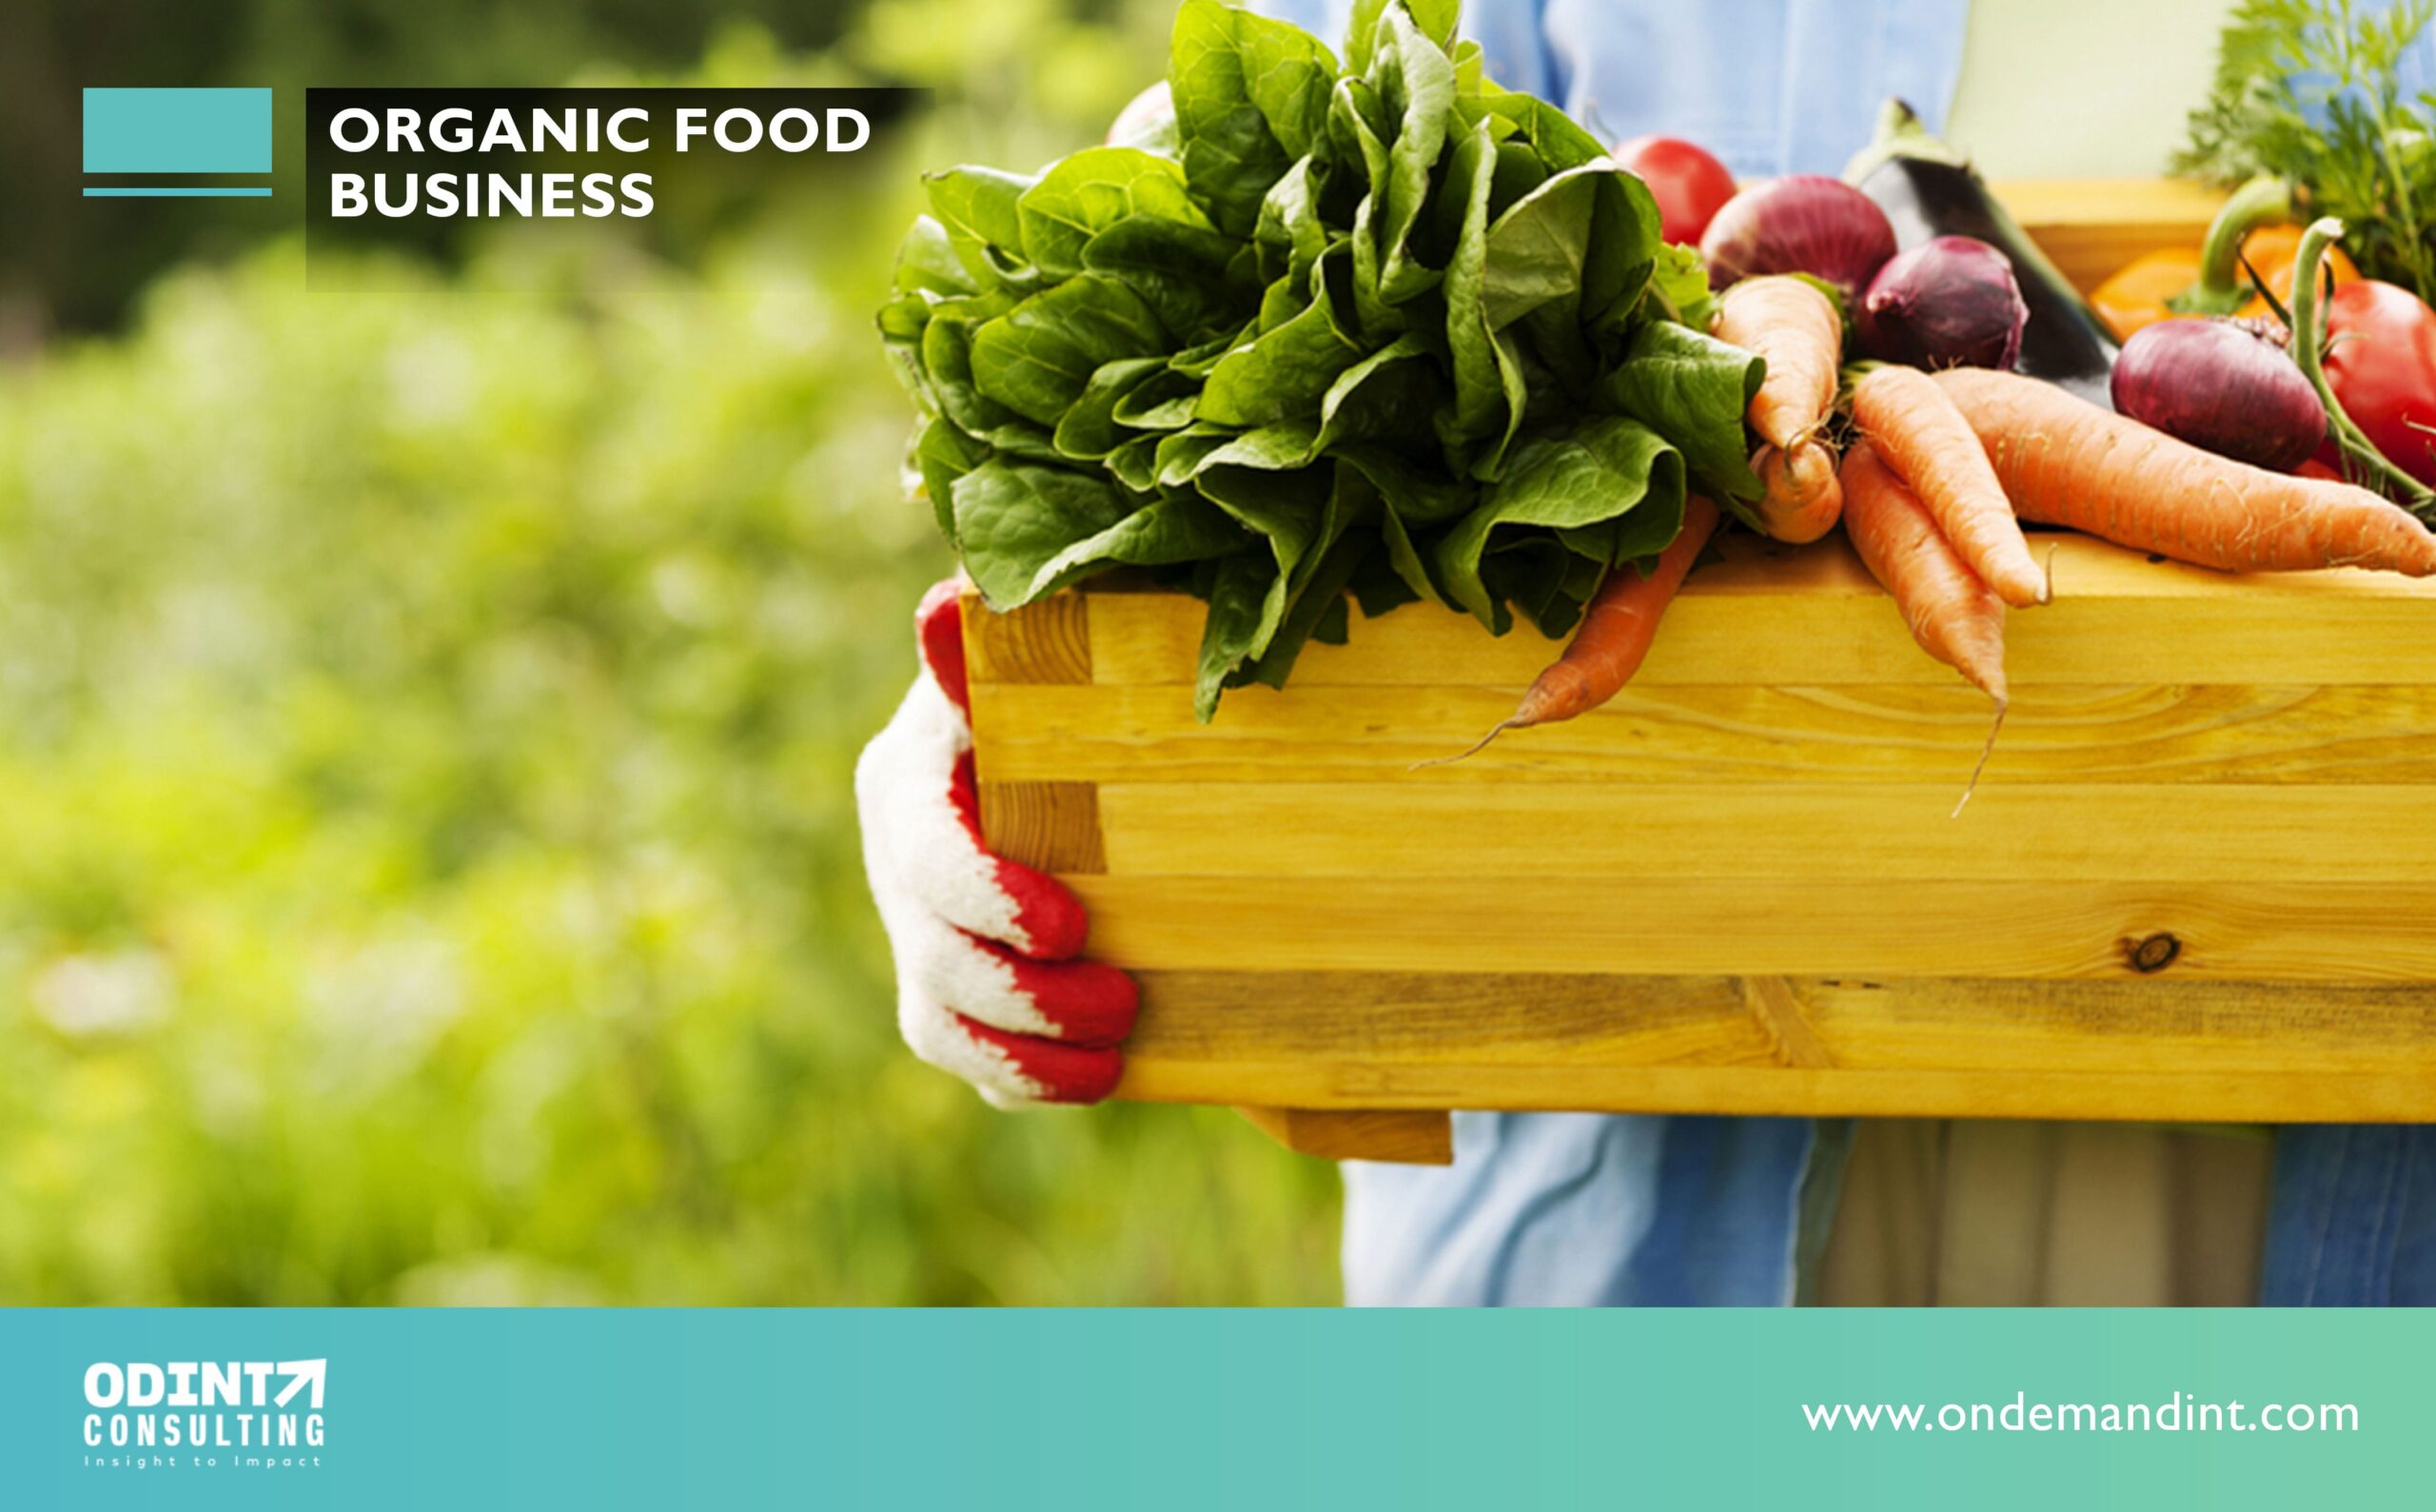 Organic Food Business: Instructions to Follow